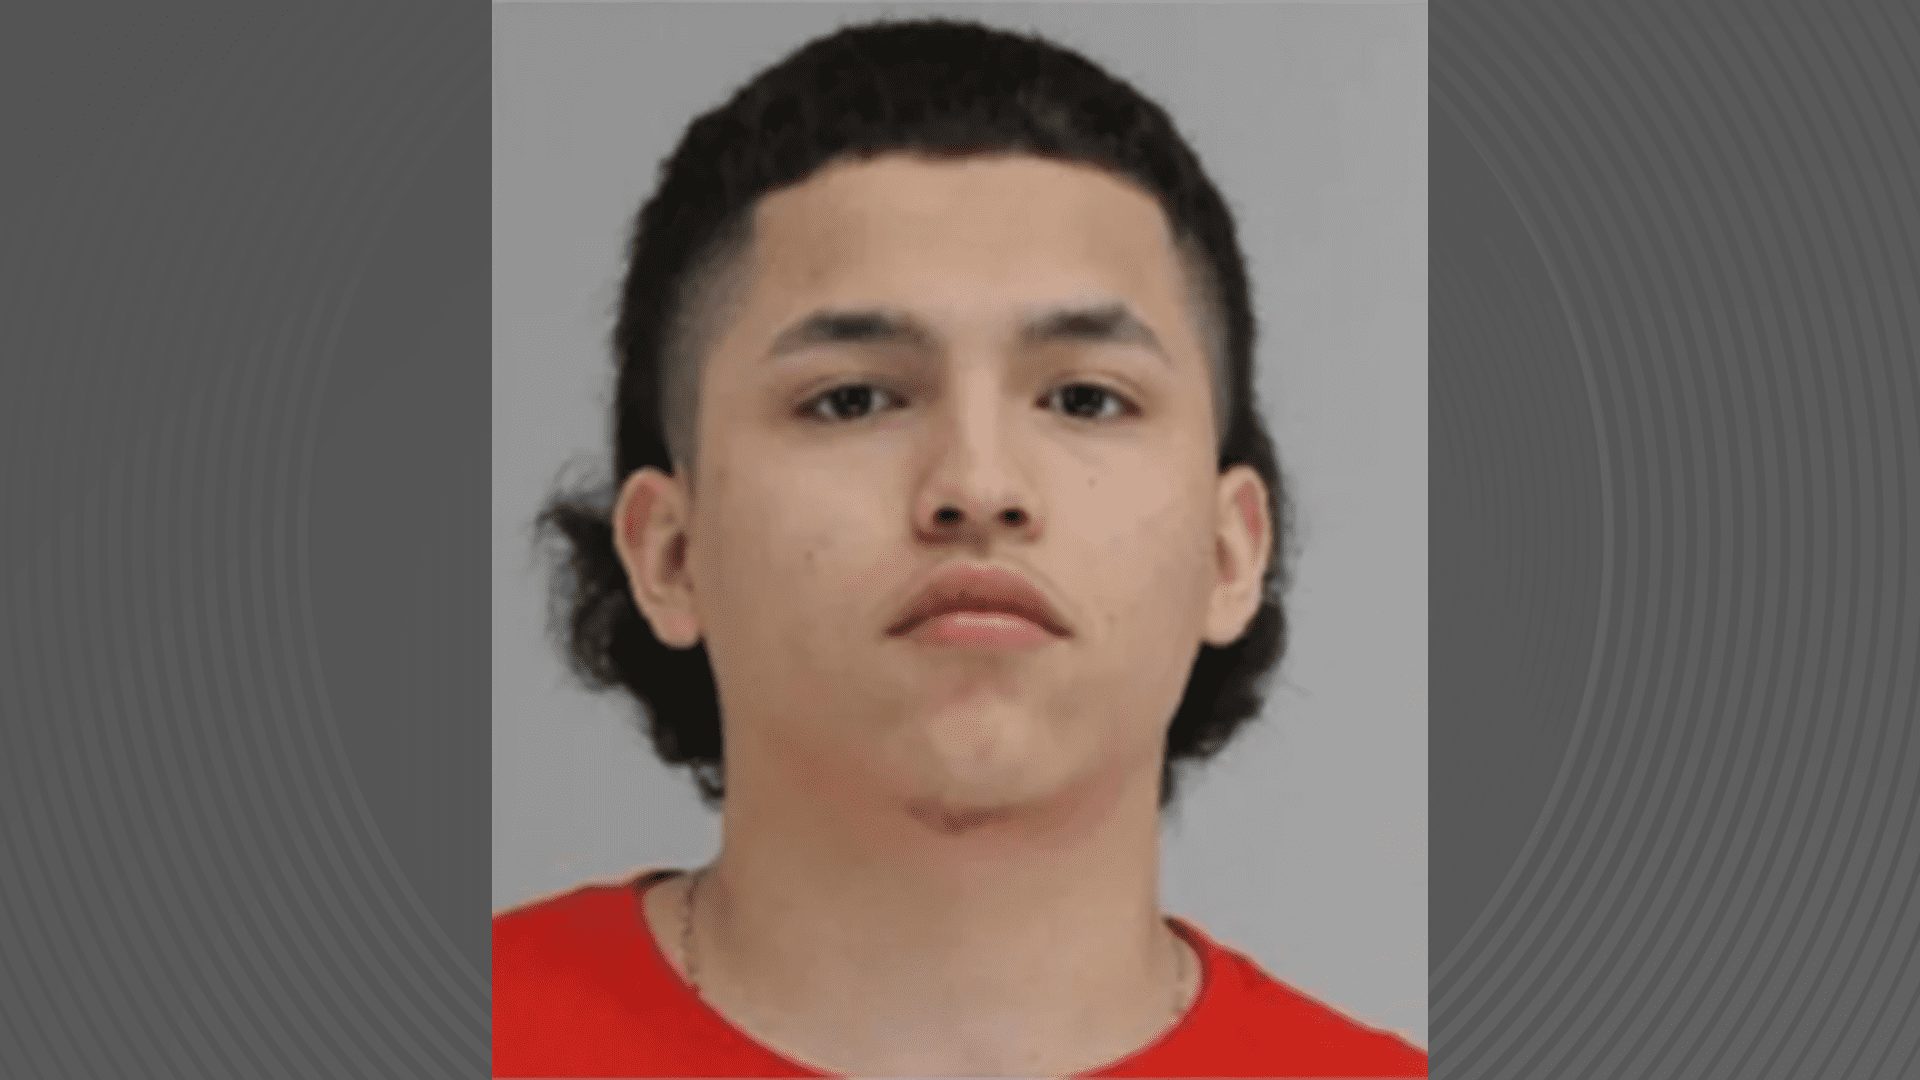 Alexander Carillo is wanted by the Dallas Police and is considered armed and dangerous.